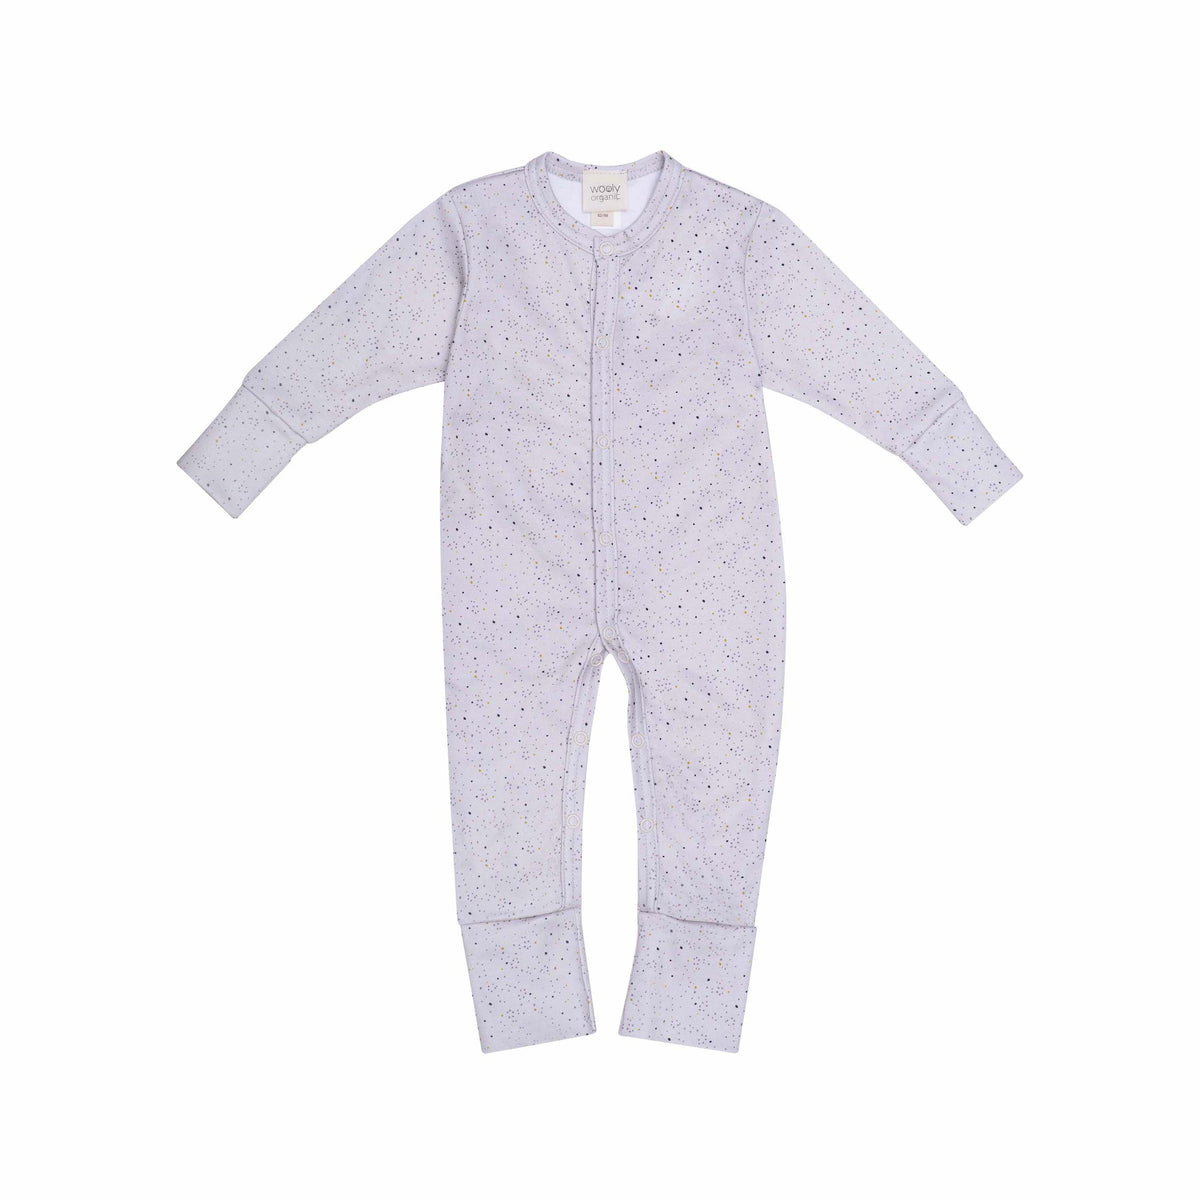 Wooly Organic - Baby Sleepsuit (Green) 80 (10-12 months)